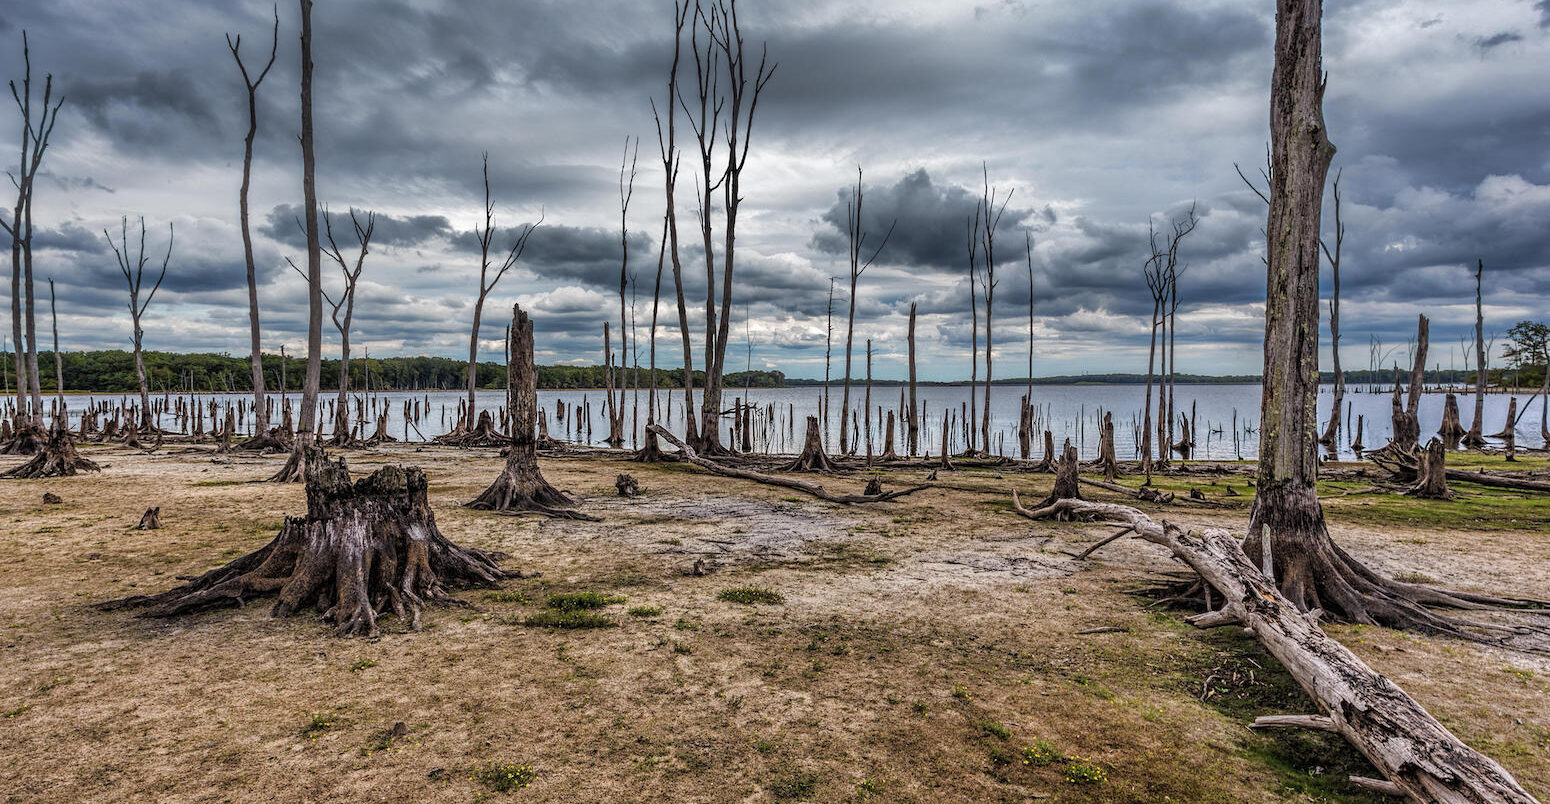 Dead trees around Manasquan Reservoir with low water levels, New Jersey, USA.